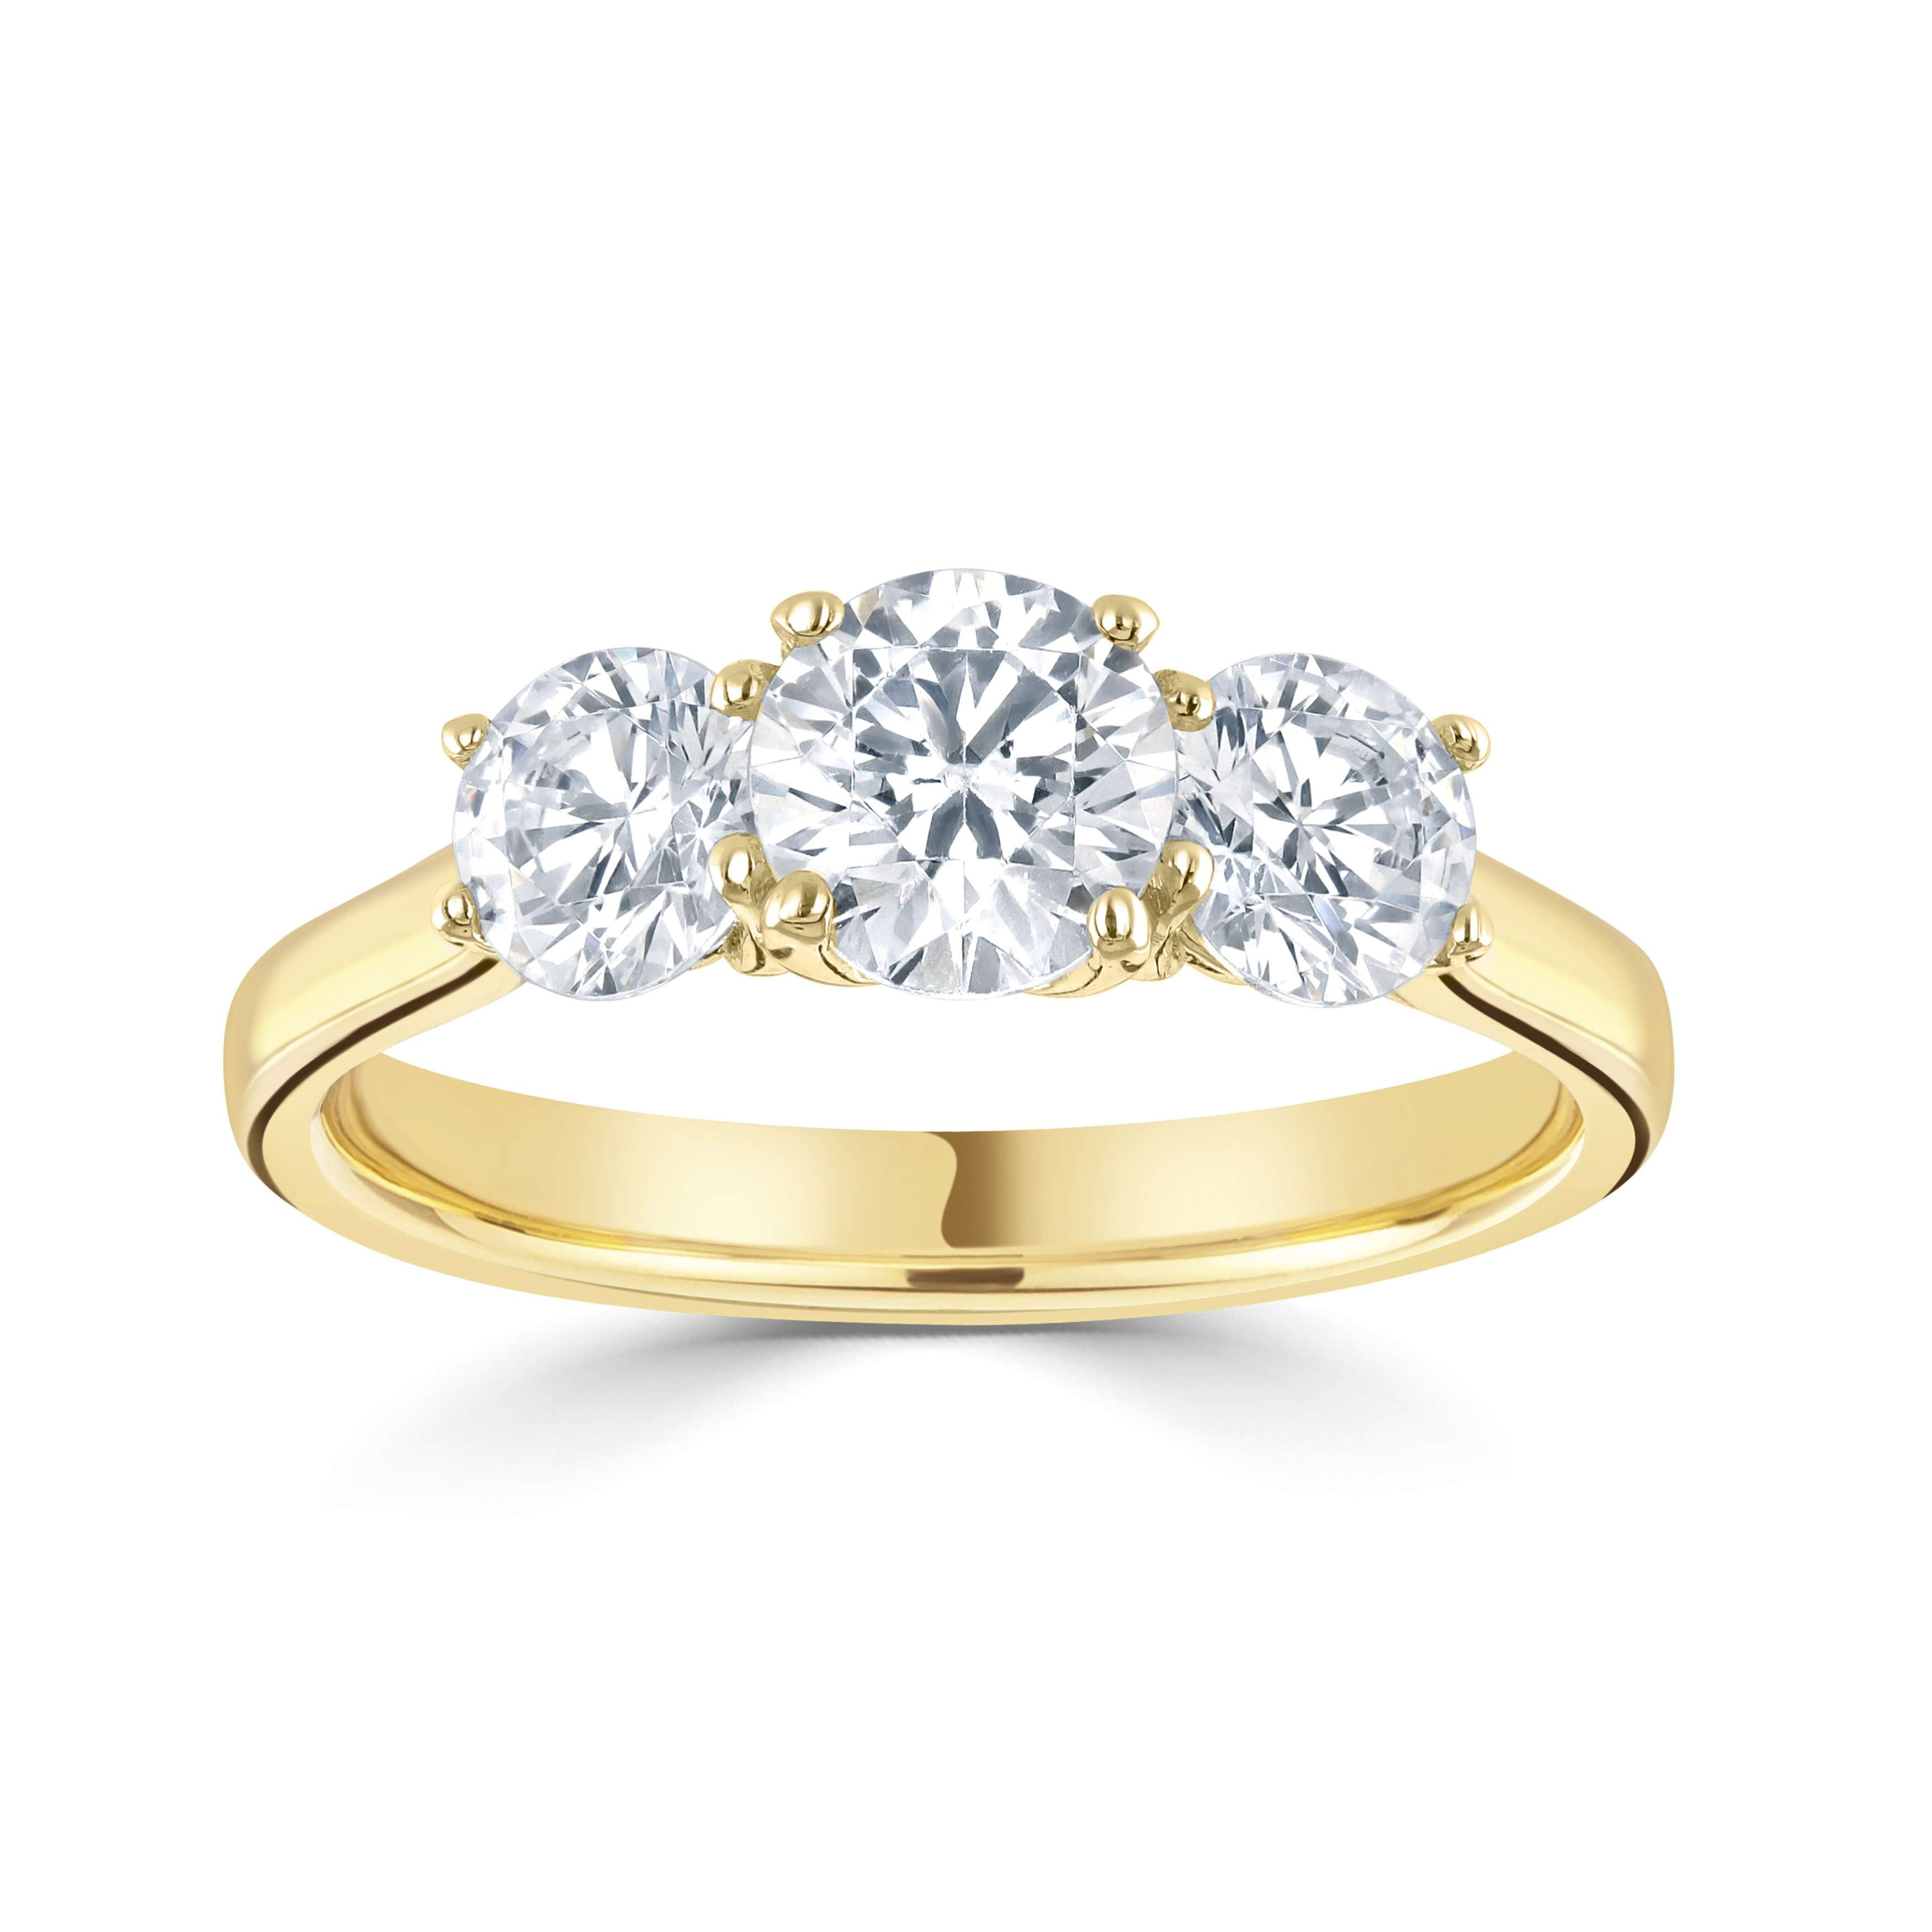 Mikayla *Select a Round Diamond 0.25ct or above